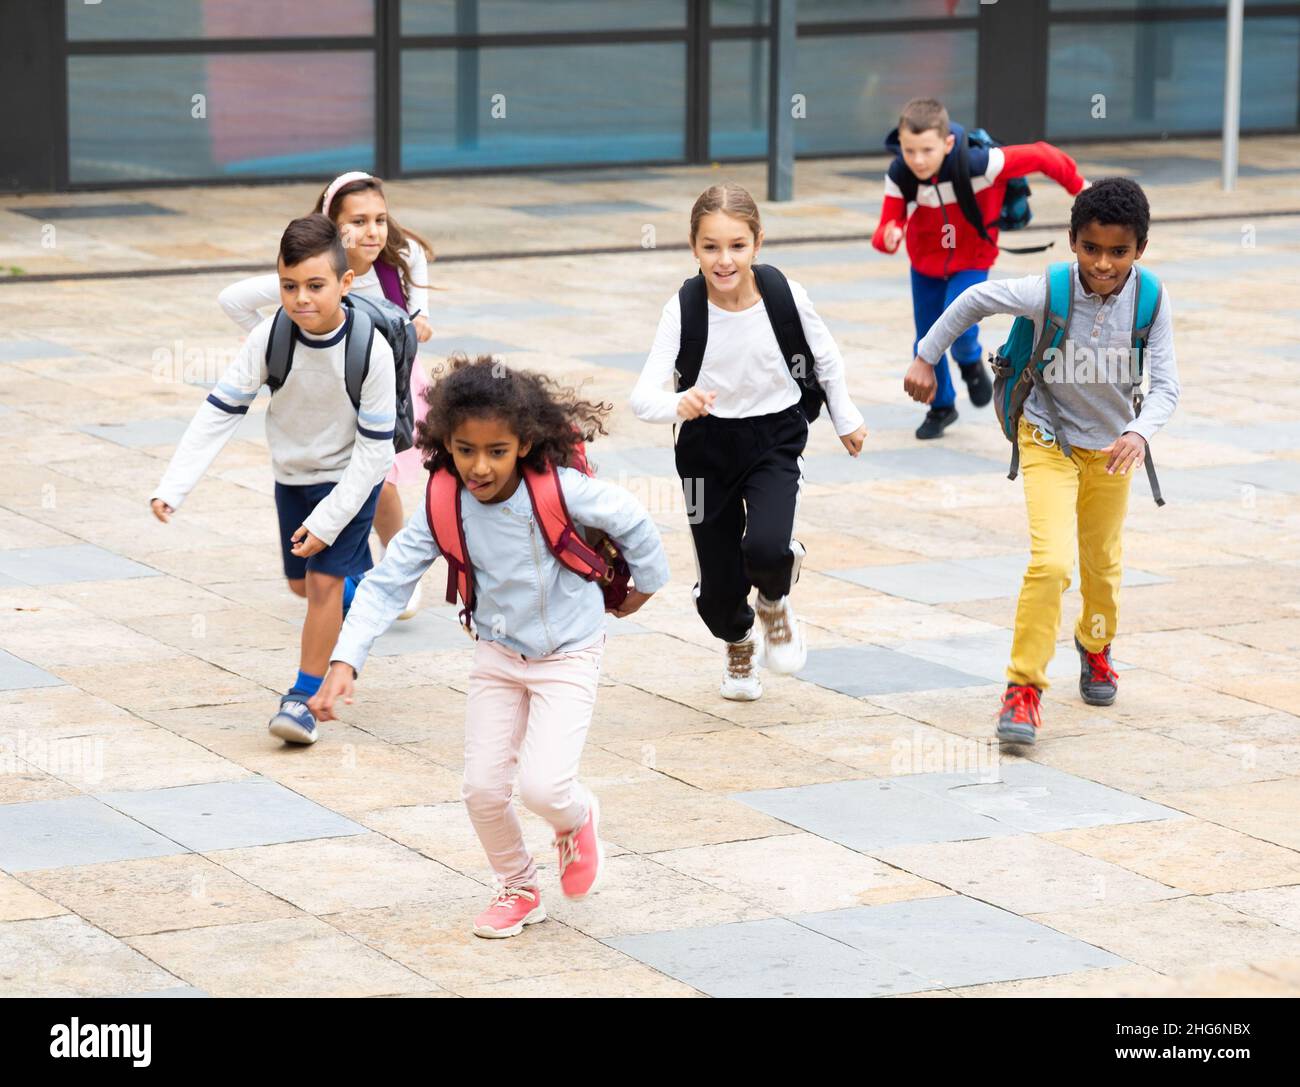 Group of cheerful tweenagers running in school yard after lessons Stock Photo